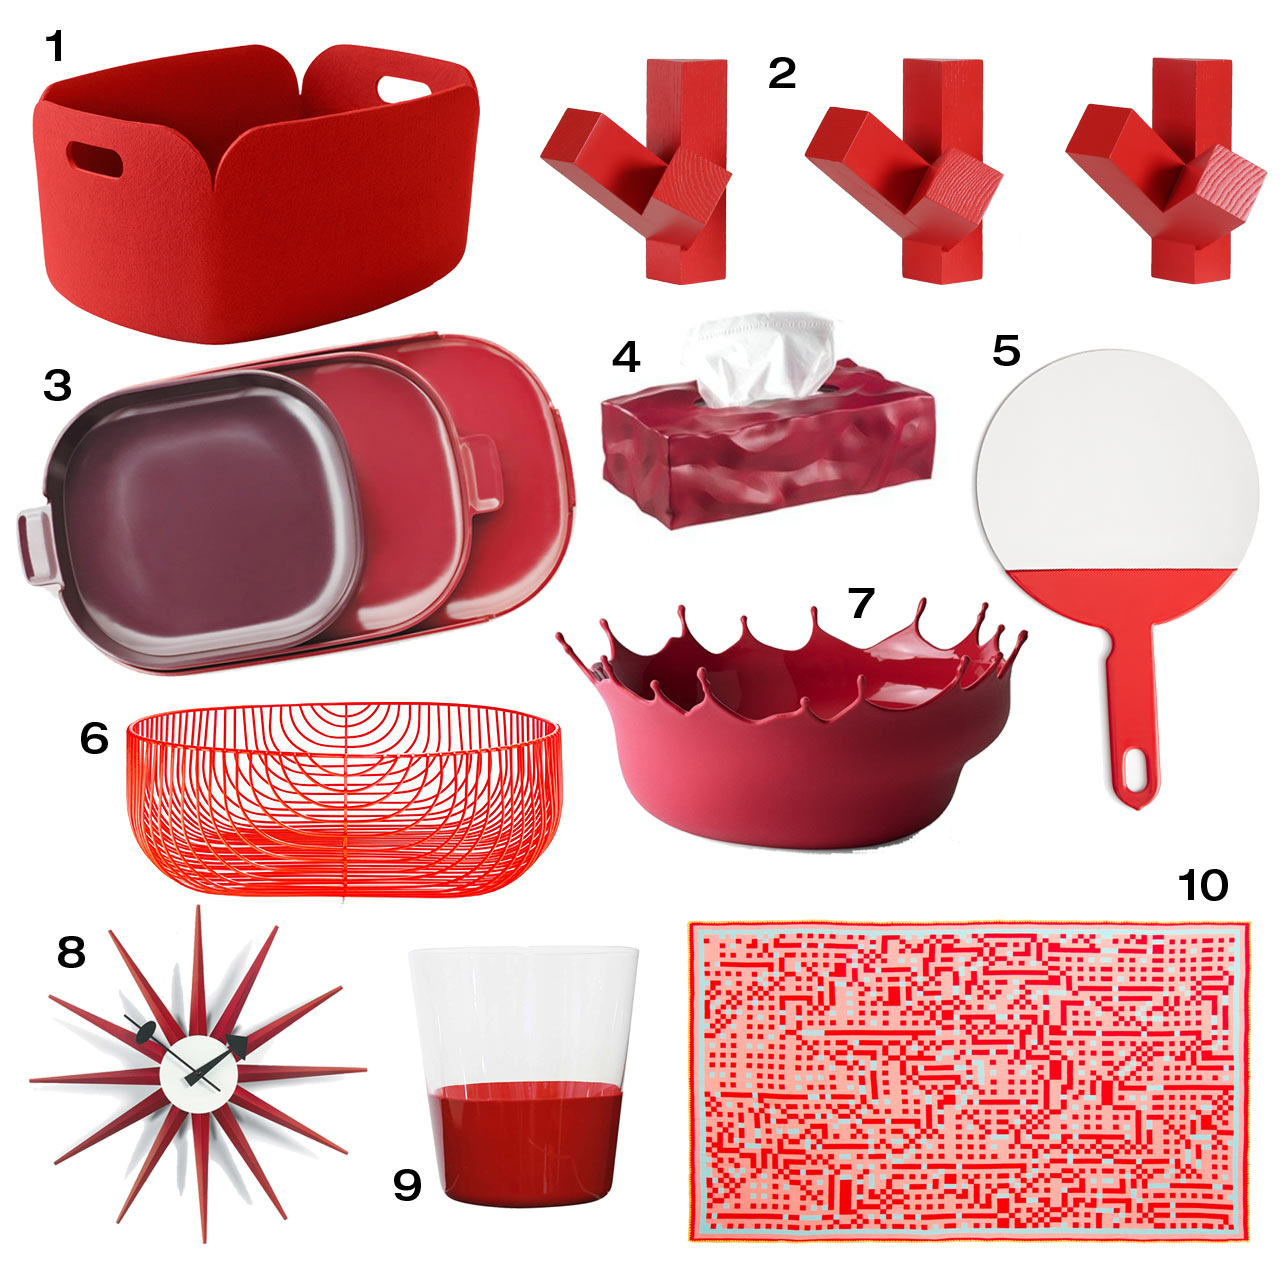 10 Red Objects You'll Fall In Love With